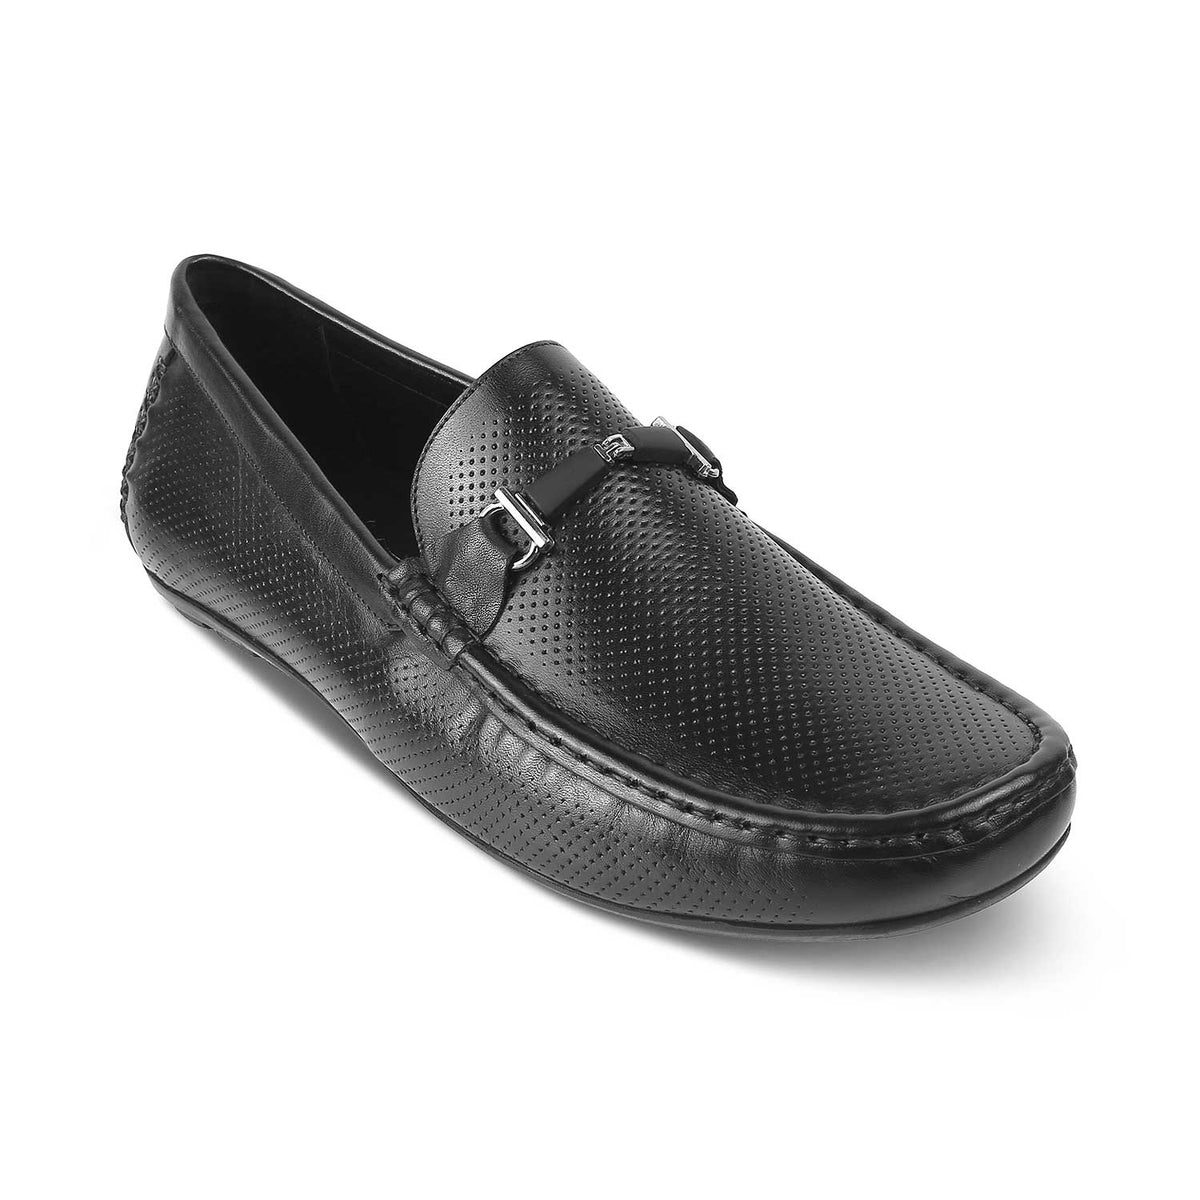 The Open Black Men's Leather Loafers - Tresmode